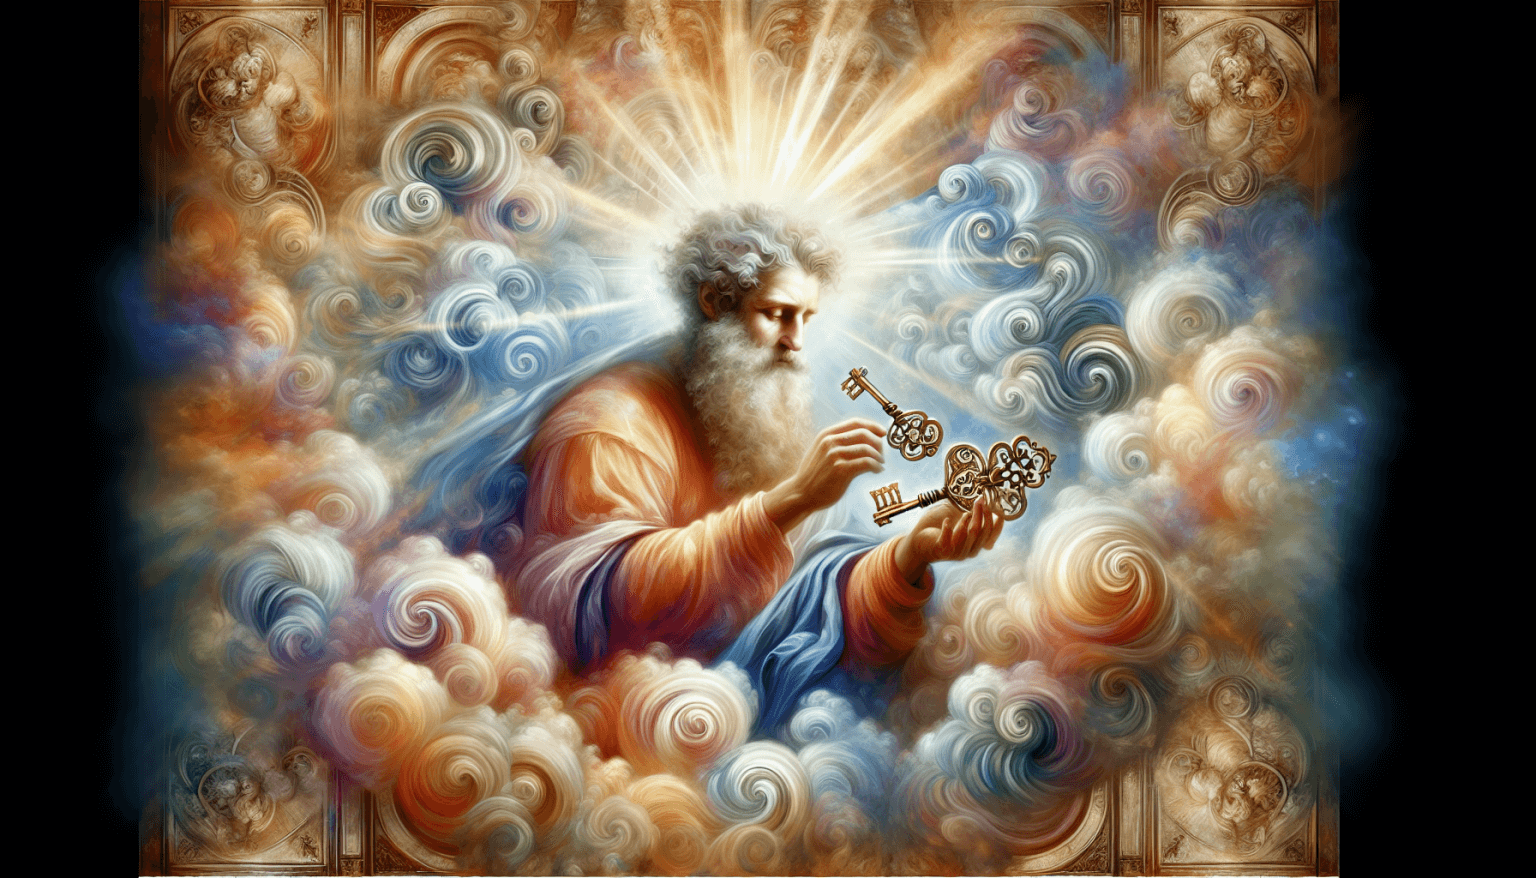 An ethereal painting depicting Saint Peter holding a set of golden keys, with intricate swirling clouds and beams of divine light illuminating him from the heavens, in a Renaissance style.